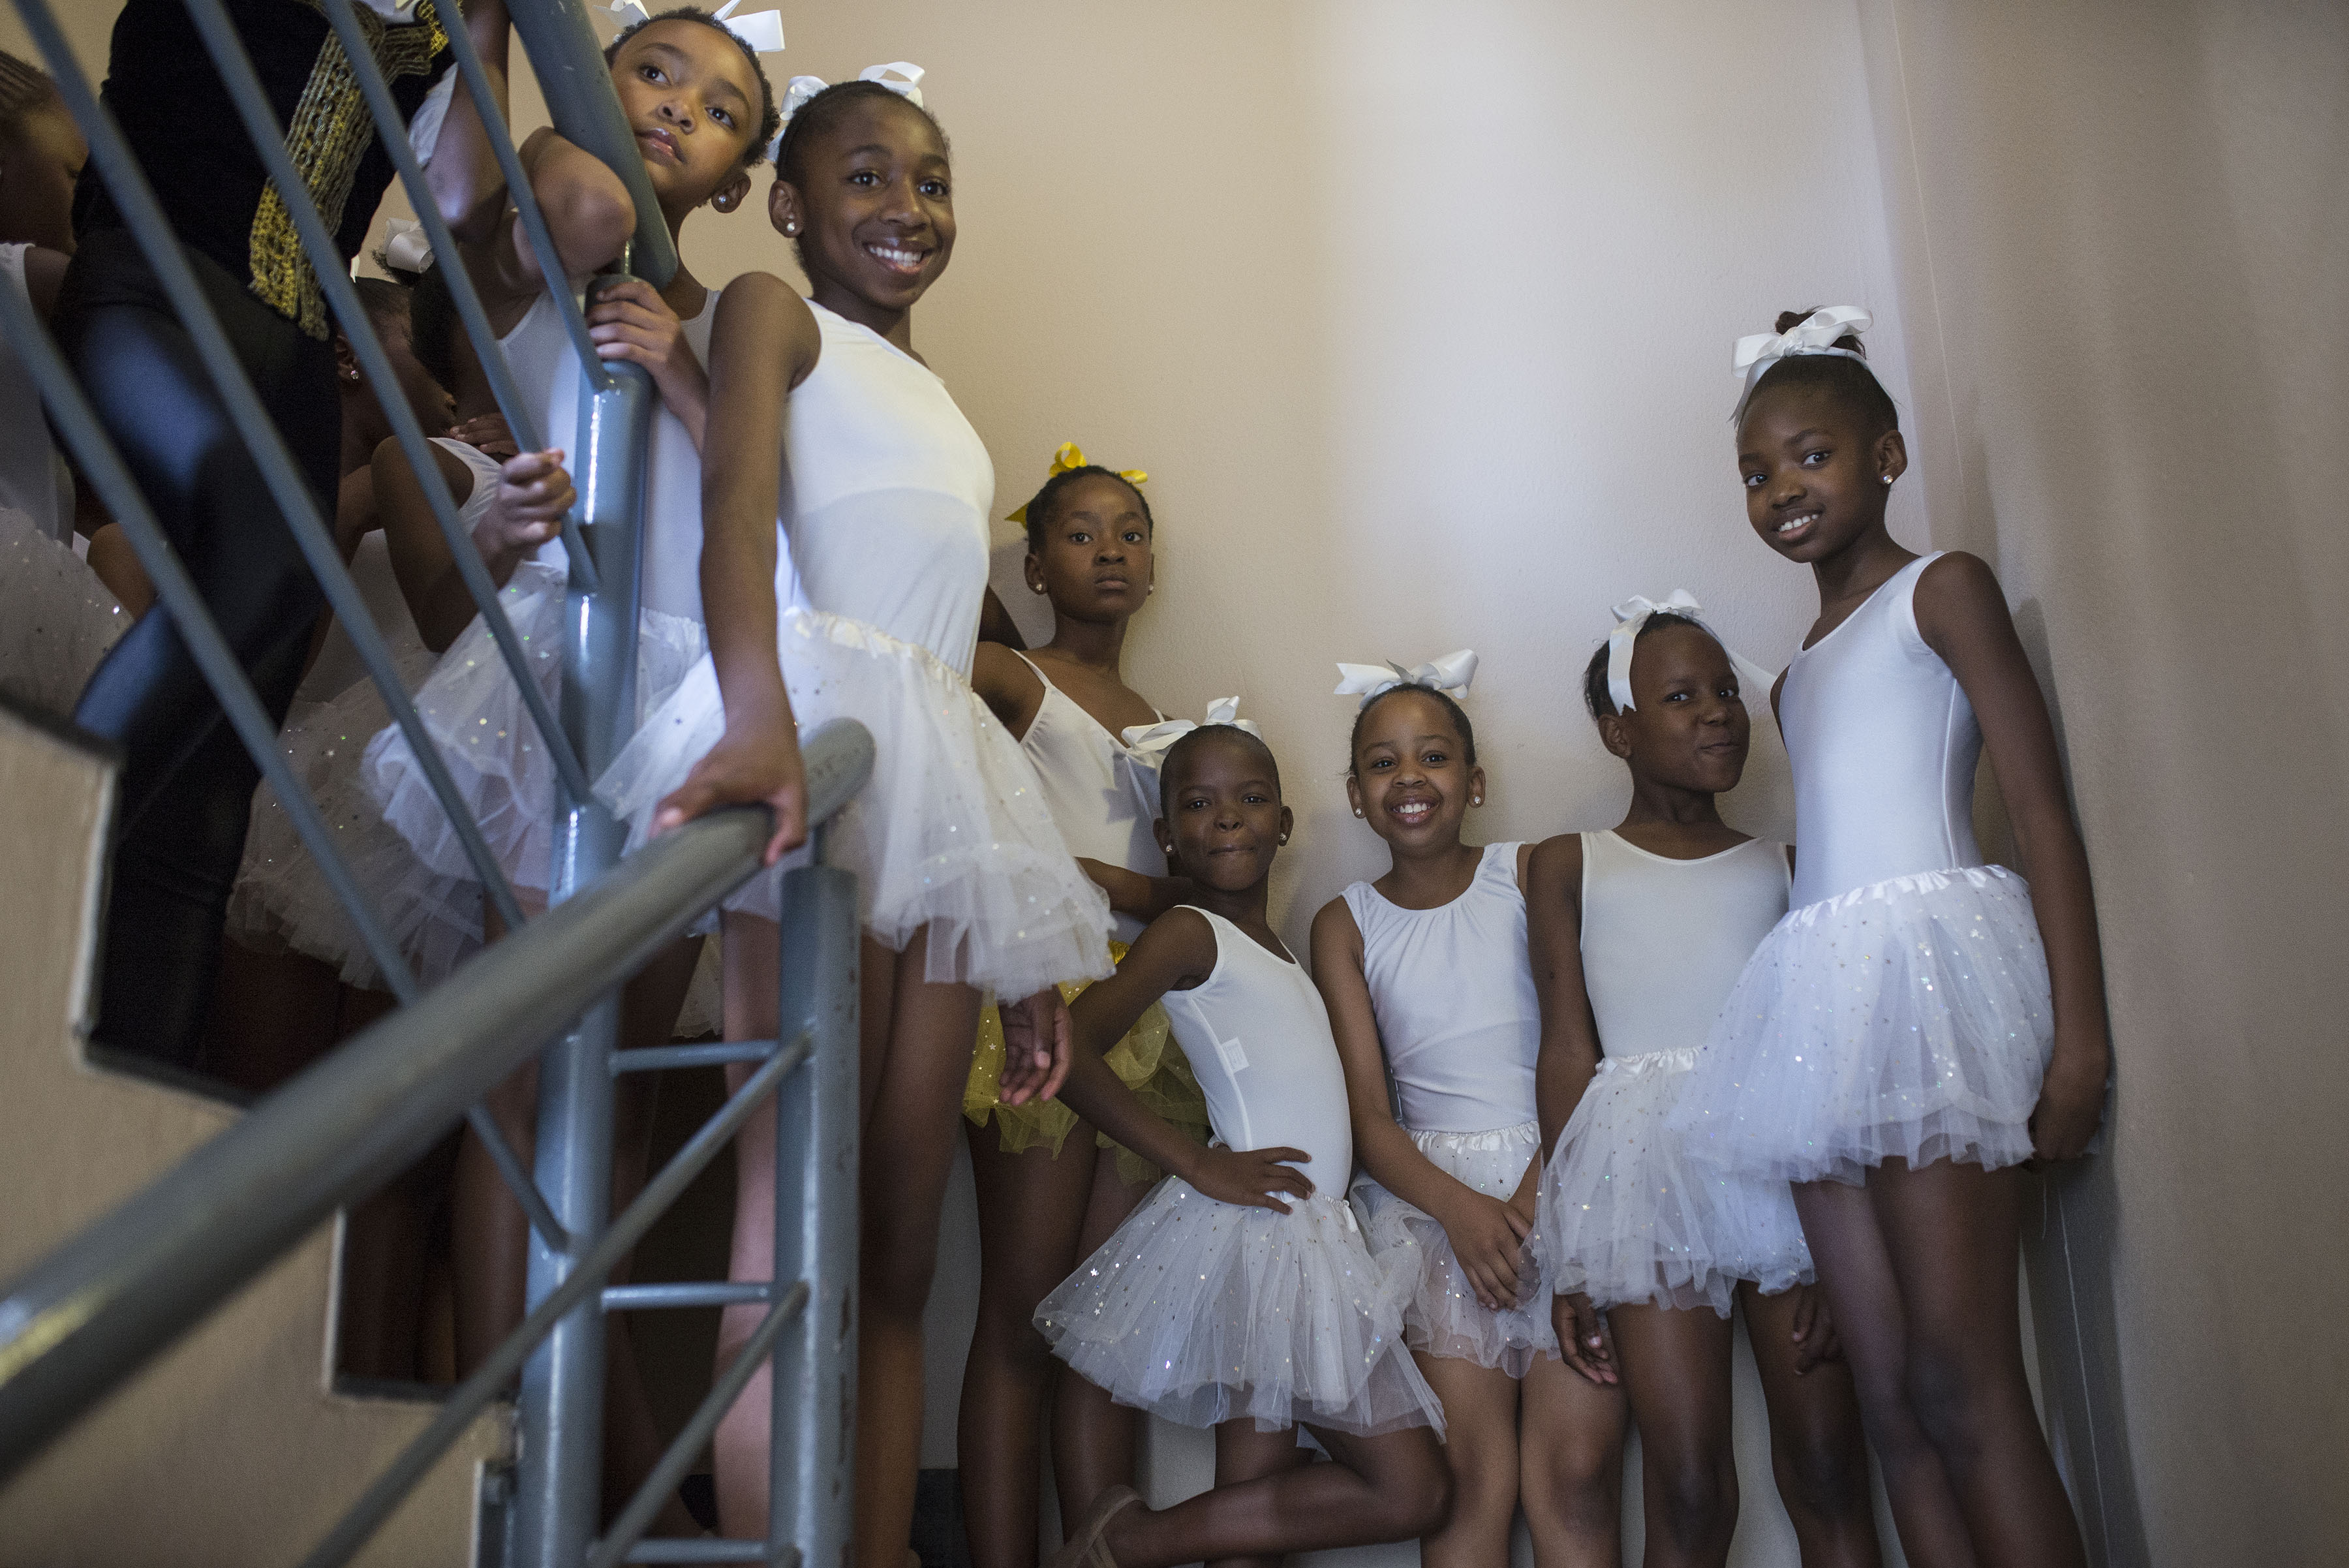 Photo f young ballet dancer waiting on the stairs